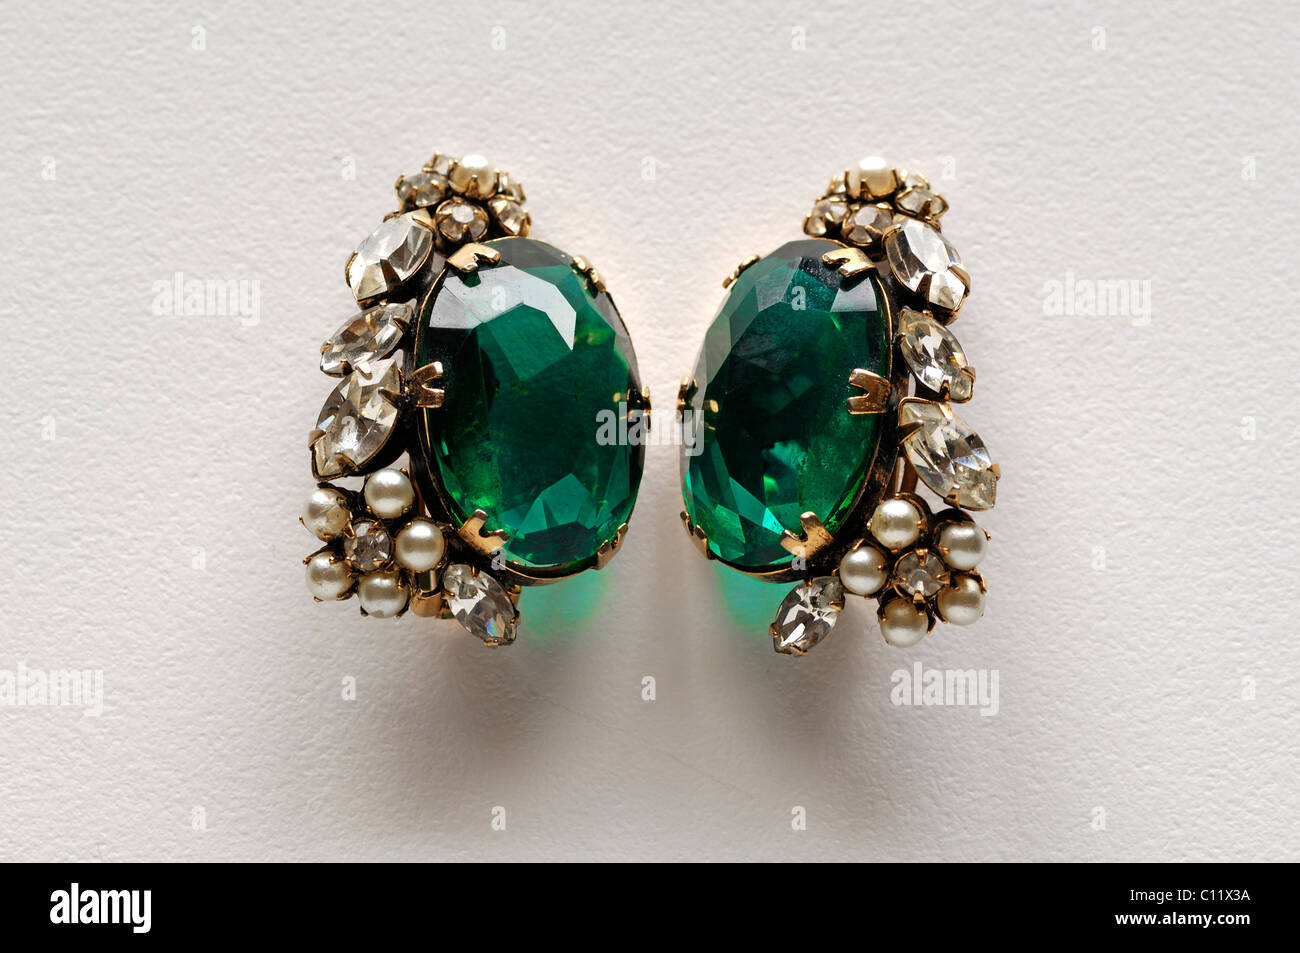 Rhinestone clip earrings from around 1940 - 1950, Sylvia Buechele Jewelry and Accessories, Nuremberg, Middle Franconia, Bavaria Stock Photo